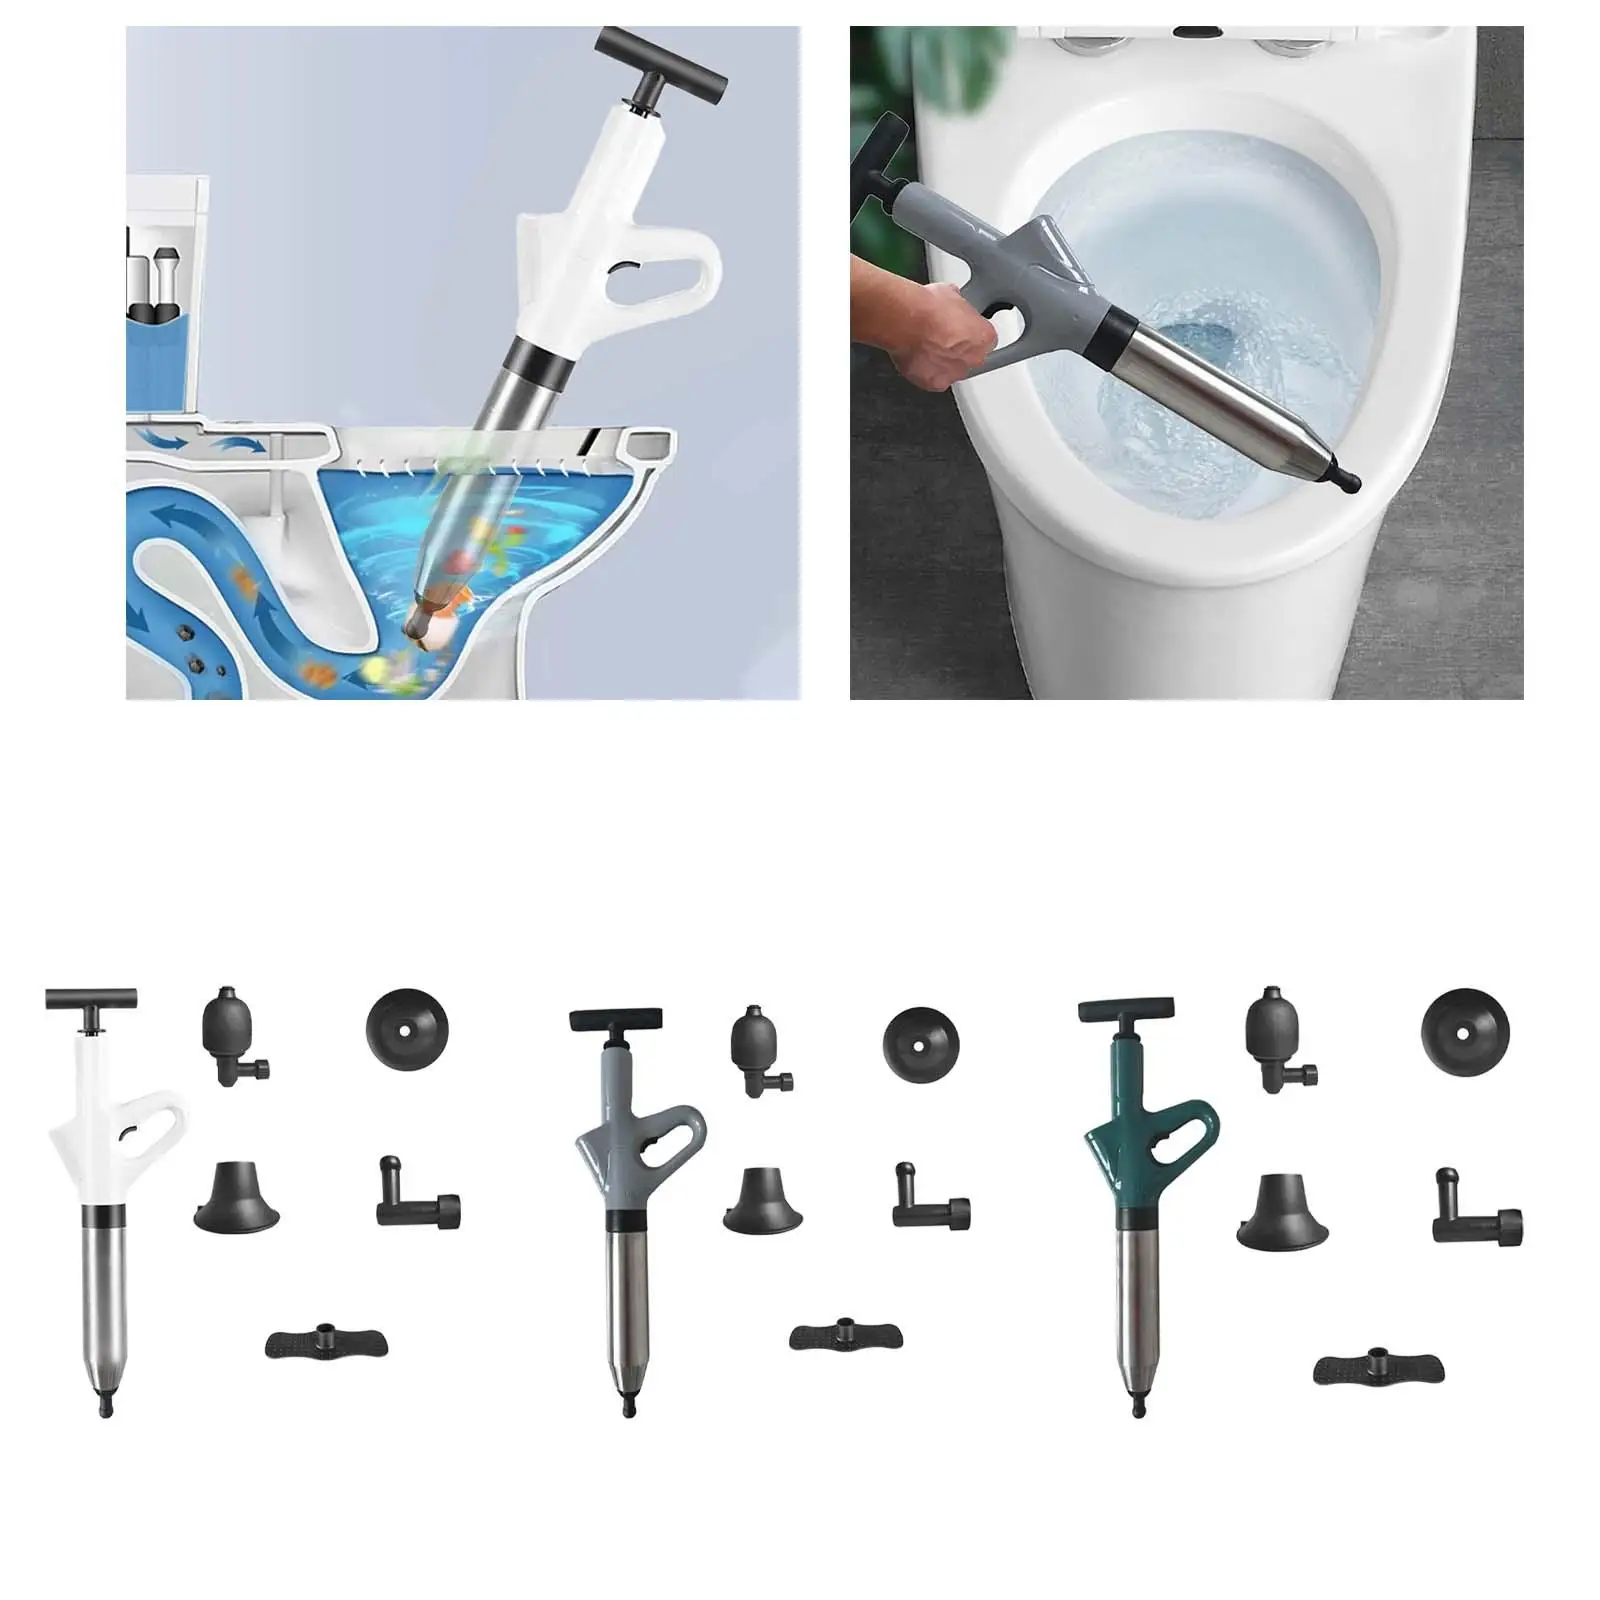 Toilet Plunger Professional Powerful Sink Plungers High Pressure Air Drain Pipe Plunger for Blocked Pipe Sewer Sinks Floor Drain